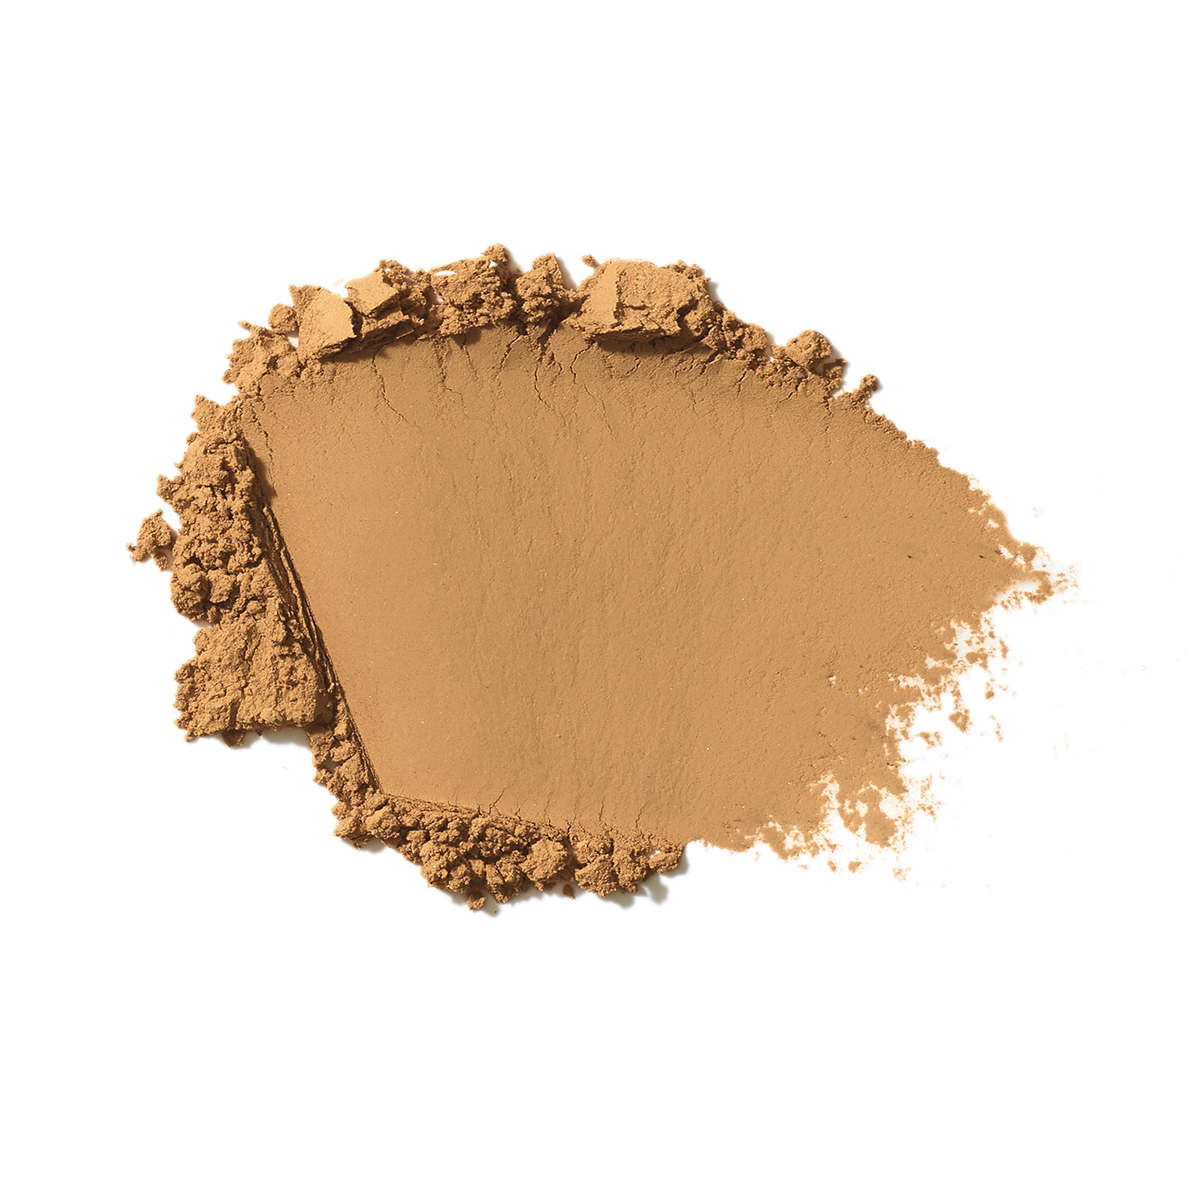 Jane Iredale Pure Pressed Base, Refill Autumn